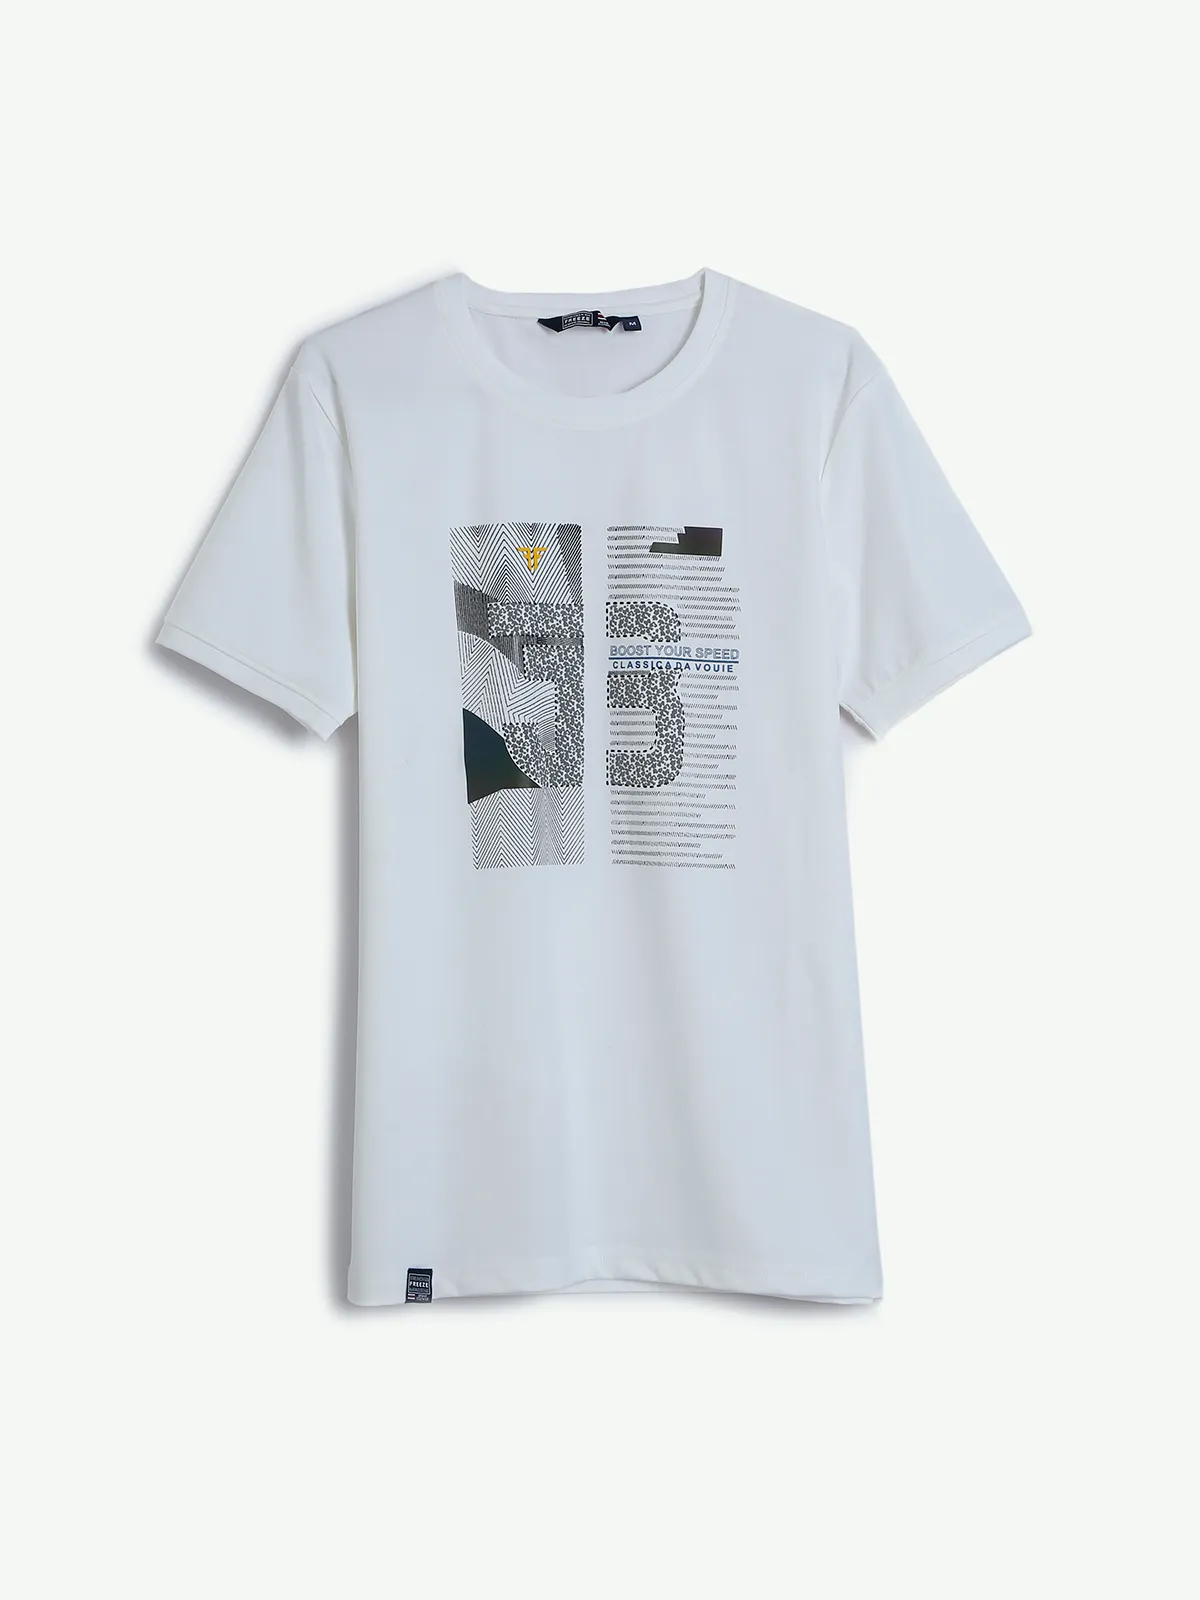 Freeze printed white t shirt for casual